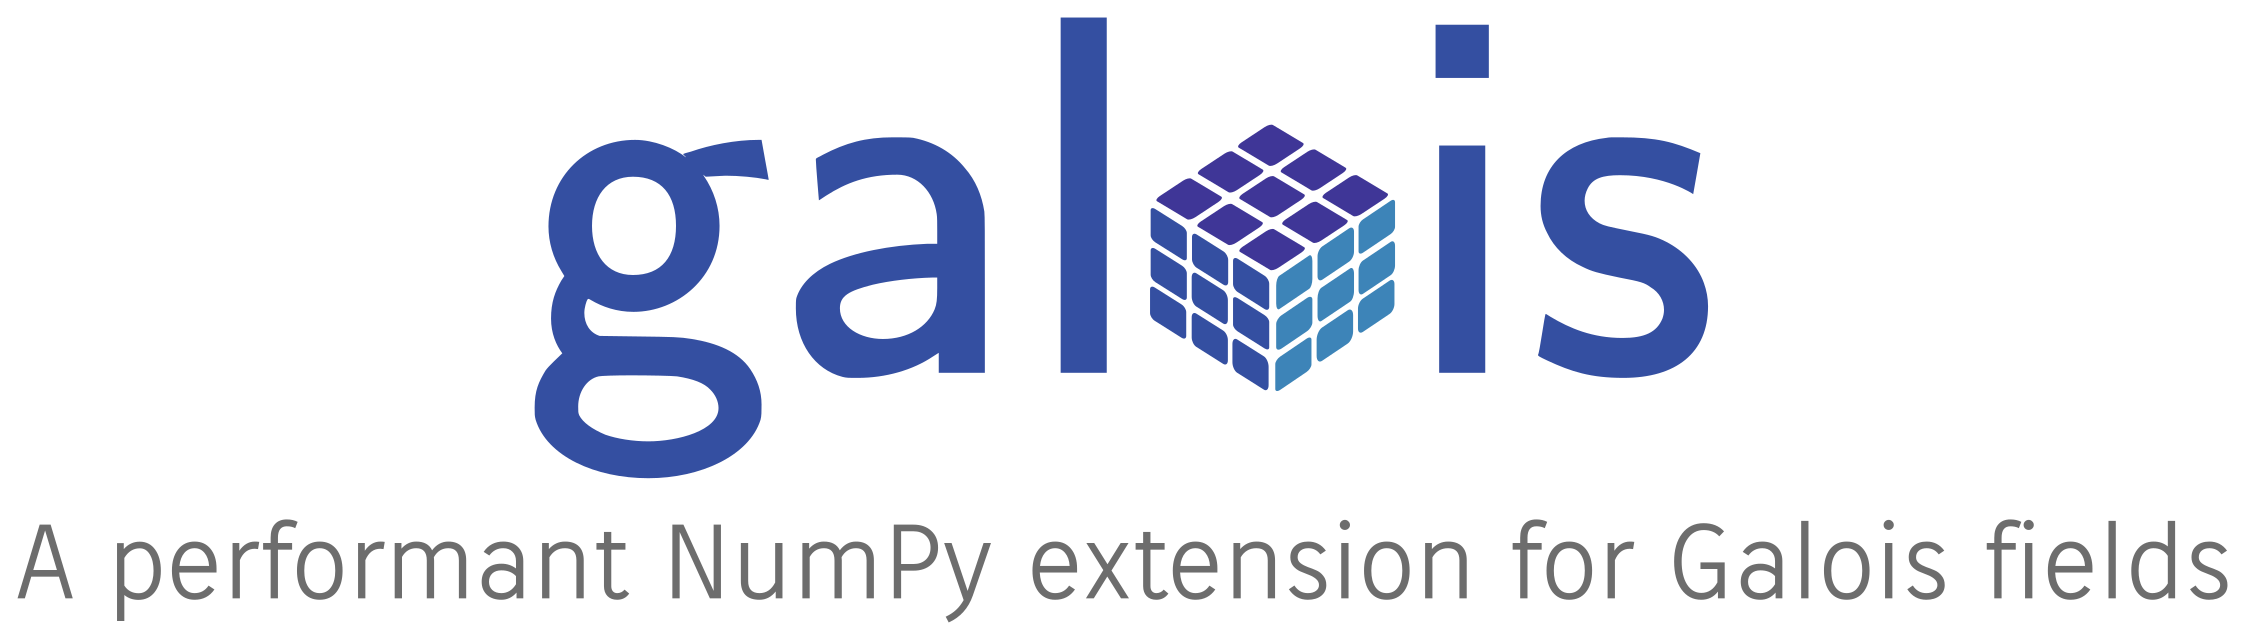 Galois: A performant NumPy extension for Galois fields and their applications